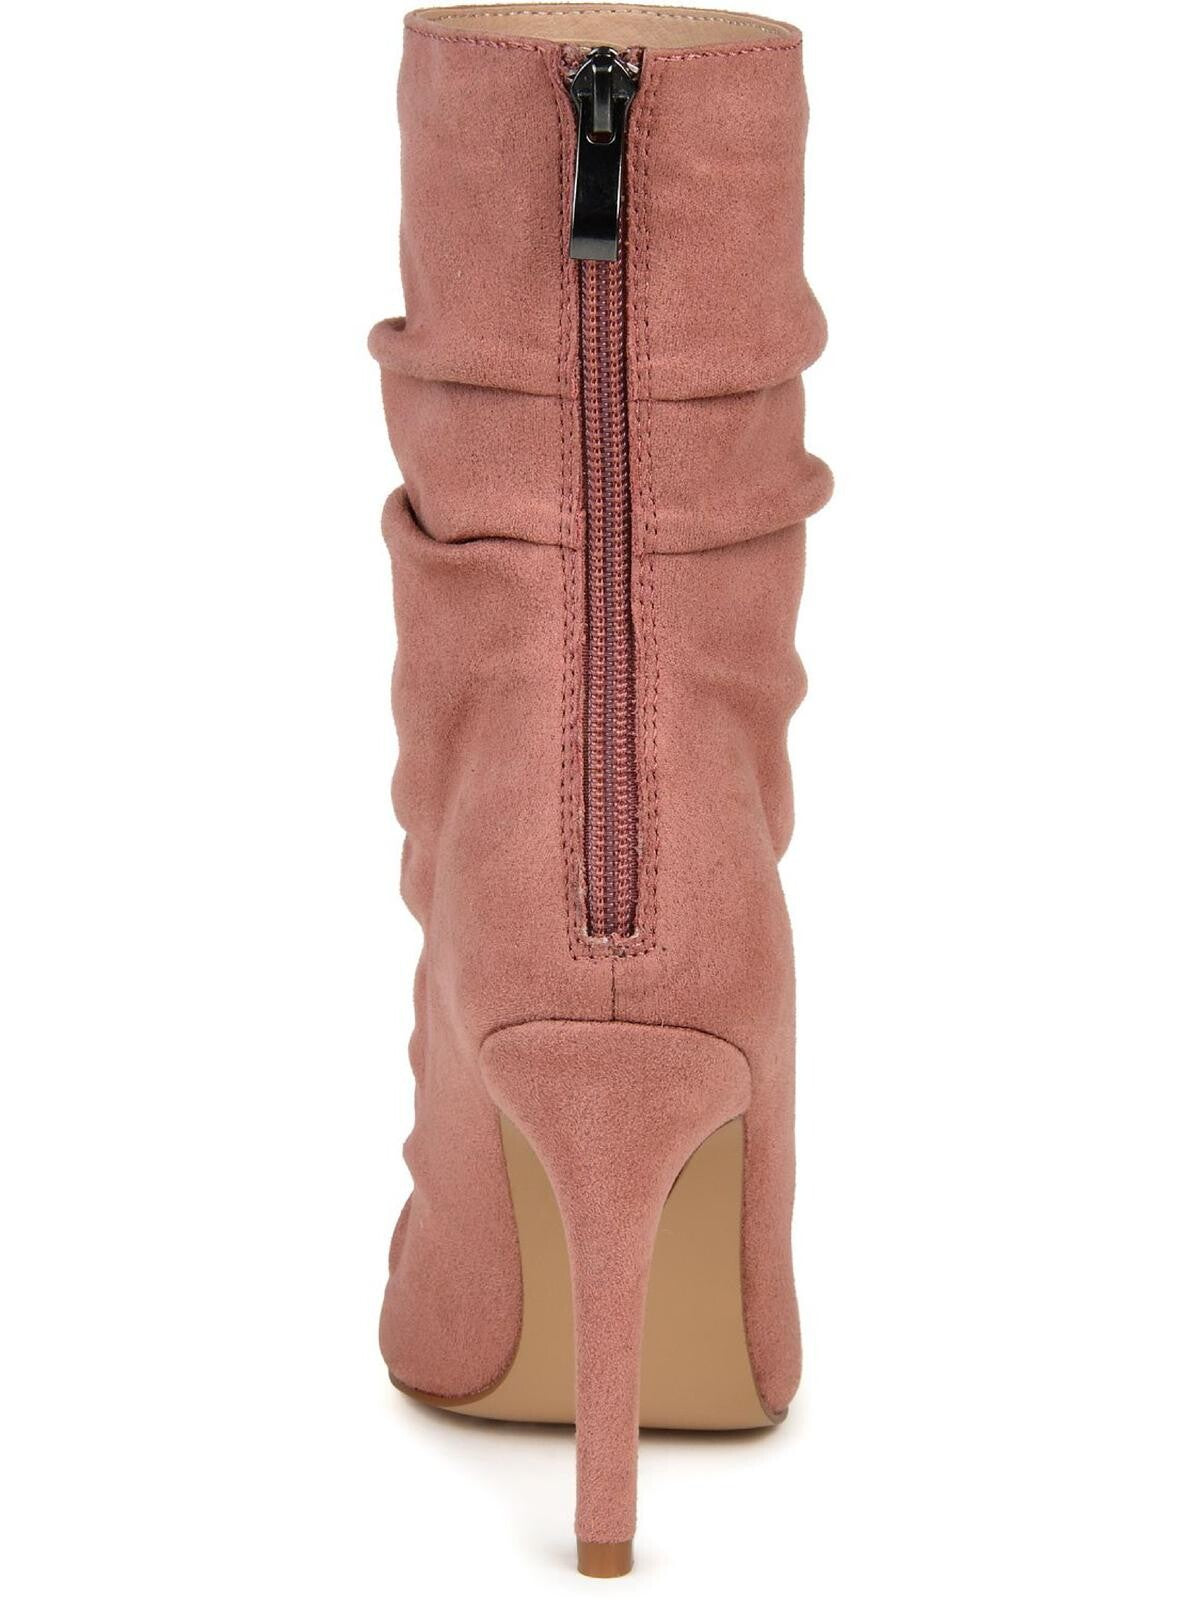 JOURNEE COLLECTION Womens Pink Cushioned Markie Pointed Toe Stiletto Zip-Up Dress Slouch Boot 6 M